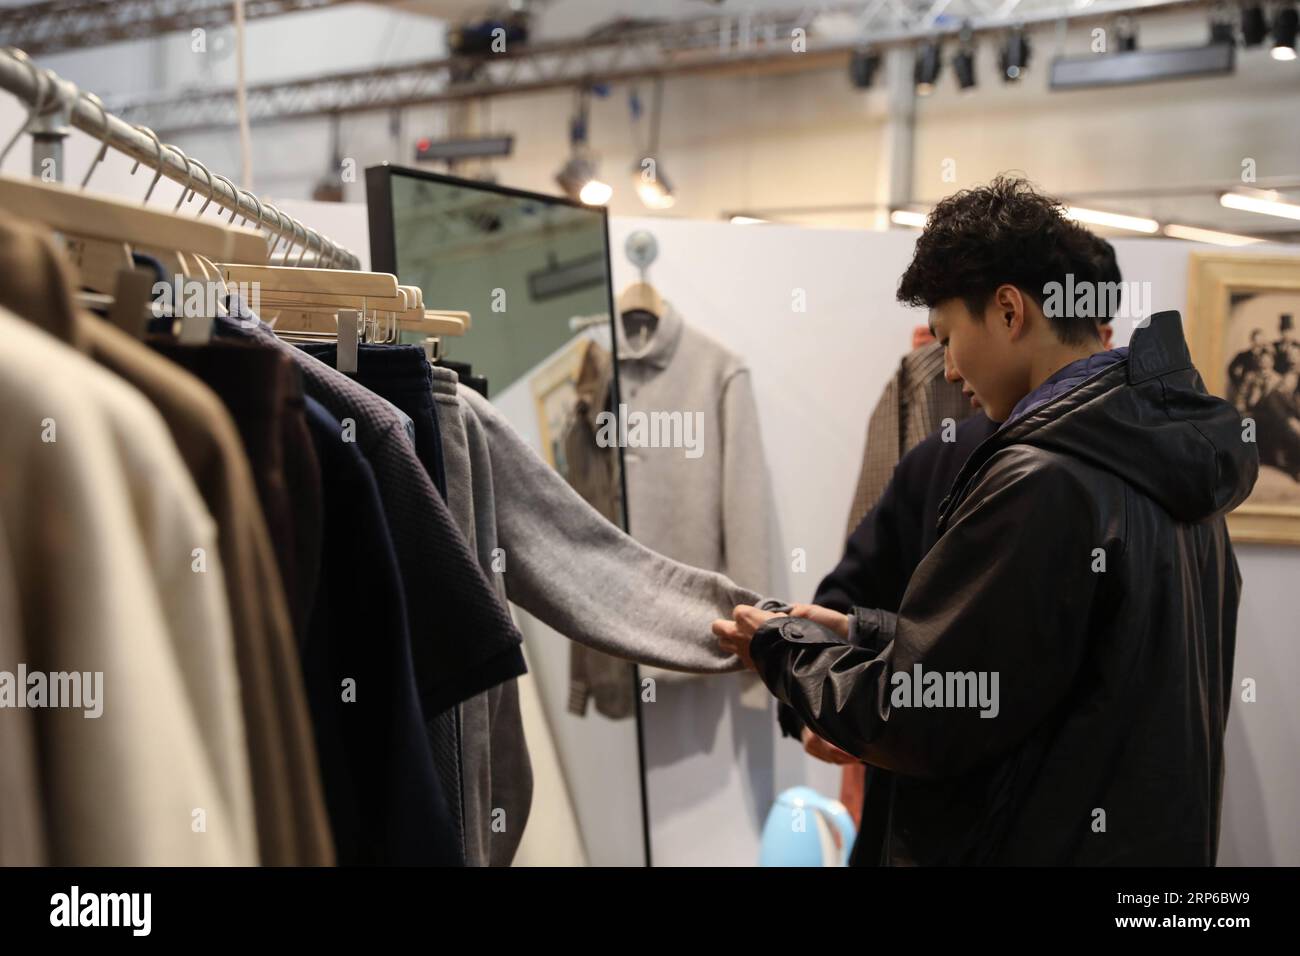 (190108) -- FLORENCE (ITALY), Jan. 8, 2019 -- A visitor looks at the products of a Japanese brand during the 95th Pitti Immagine Uomo exhibition in Florence, Italy, Jan. 8, 2019. The exhibition, one of the world s most important platforms for men s clothing and accessory collections, is held here from Jan. 8 to 11. ) ITALY-FLORENCE-MEN S CLOTHING AND ACCESSORY-EXHIBITION ChengxTingting PUBLICATIONxNOTxINxCHN Stock Photo